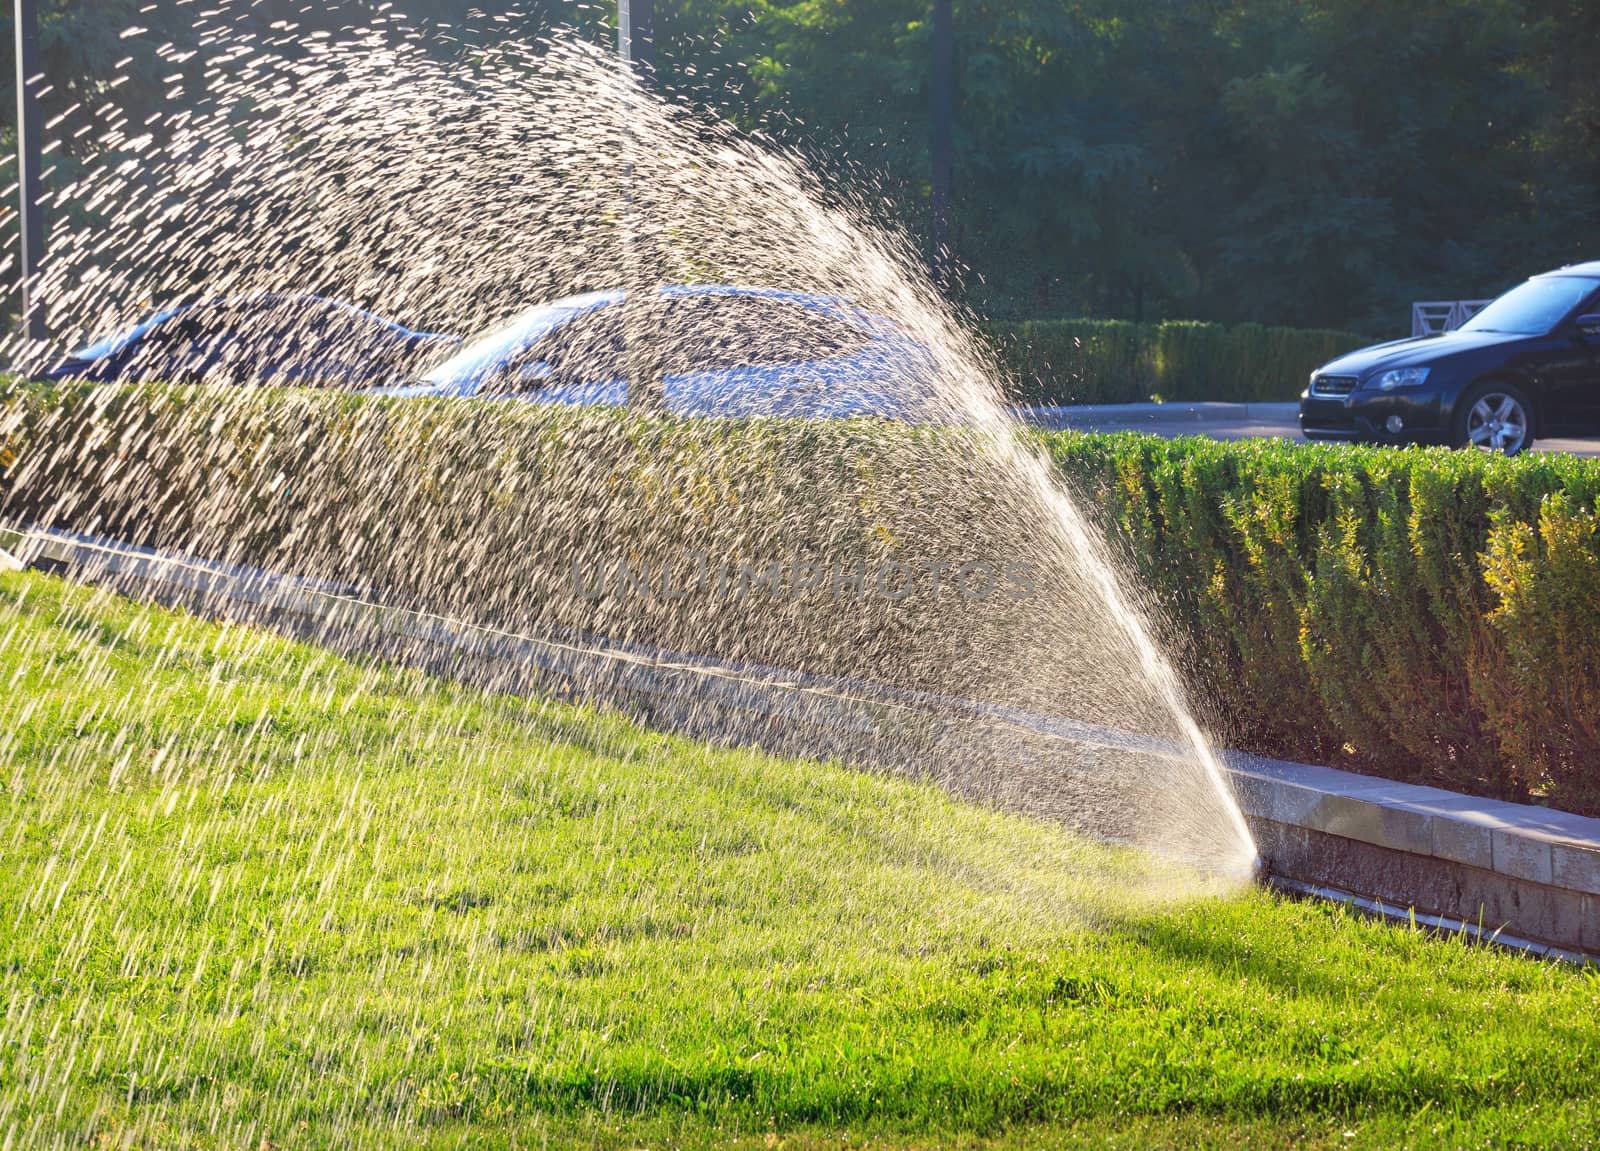 A beautiful spray fountain from an automatic sprinkler system sprays the green lawn on a bright sunny day. by Sergii